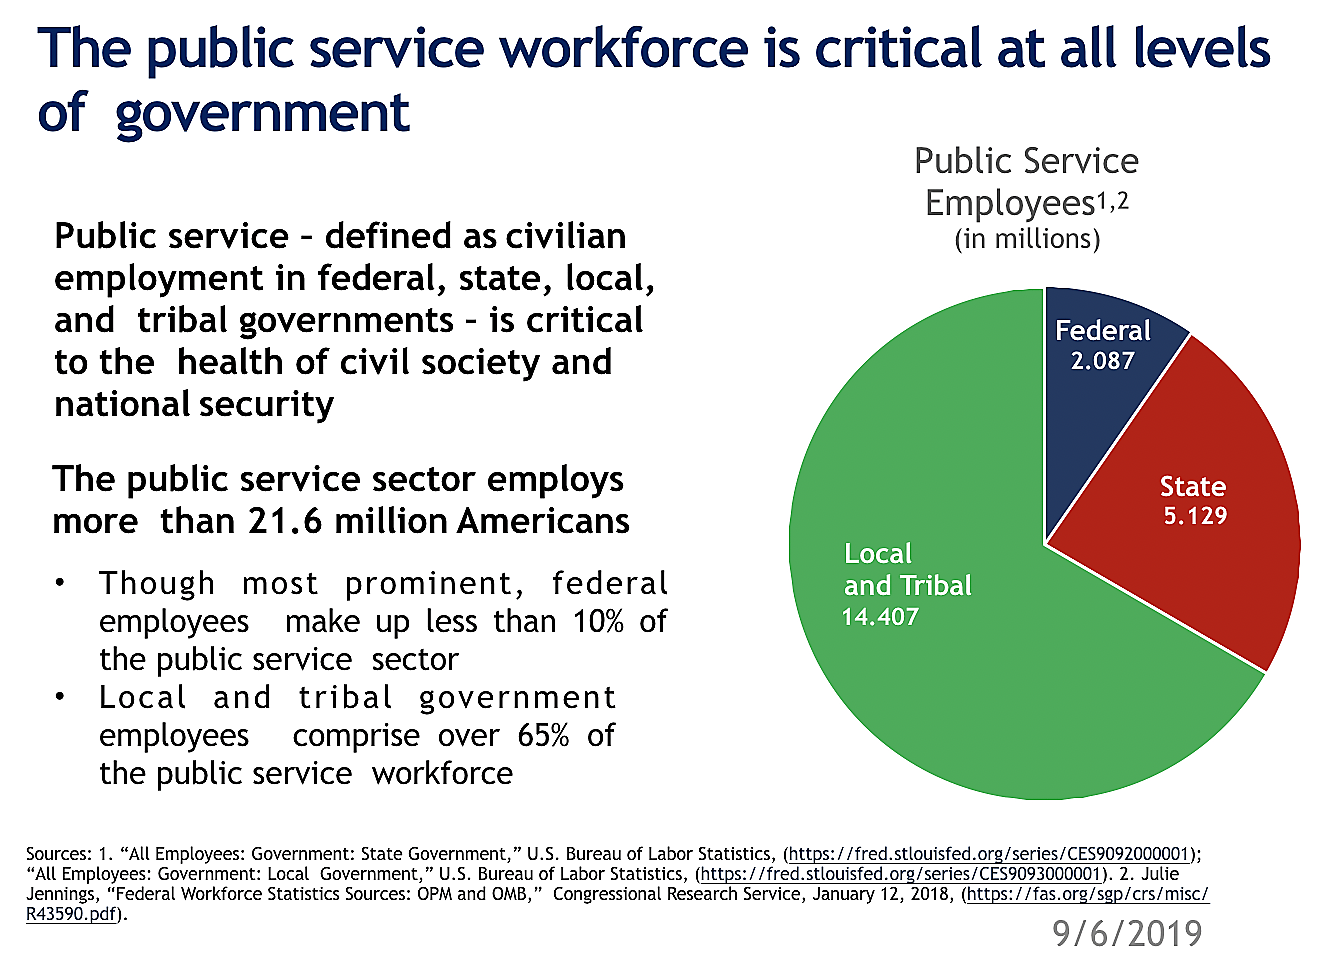 All levels of government need high-quality, skilled employees.